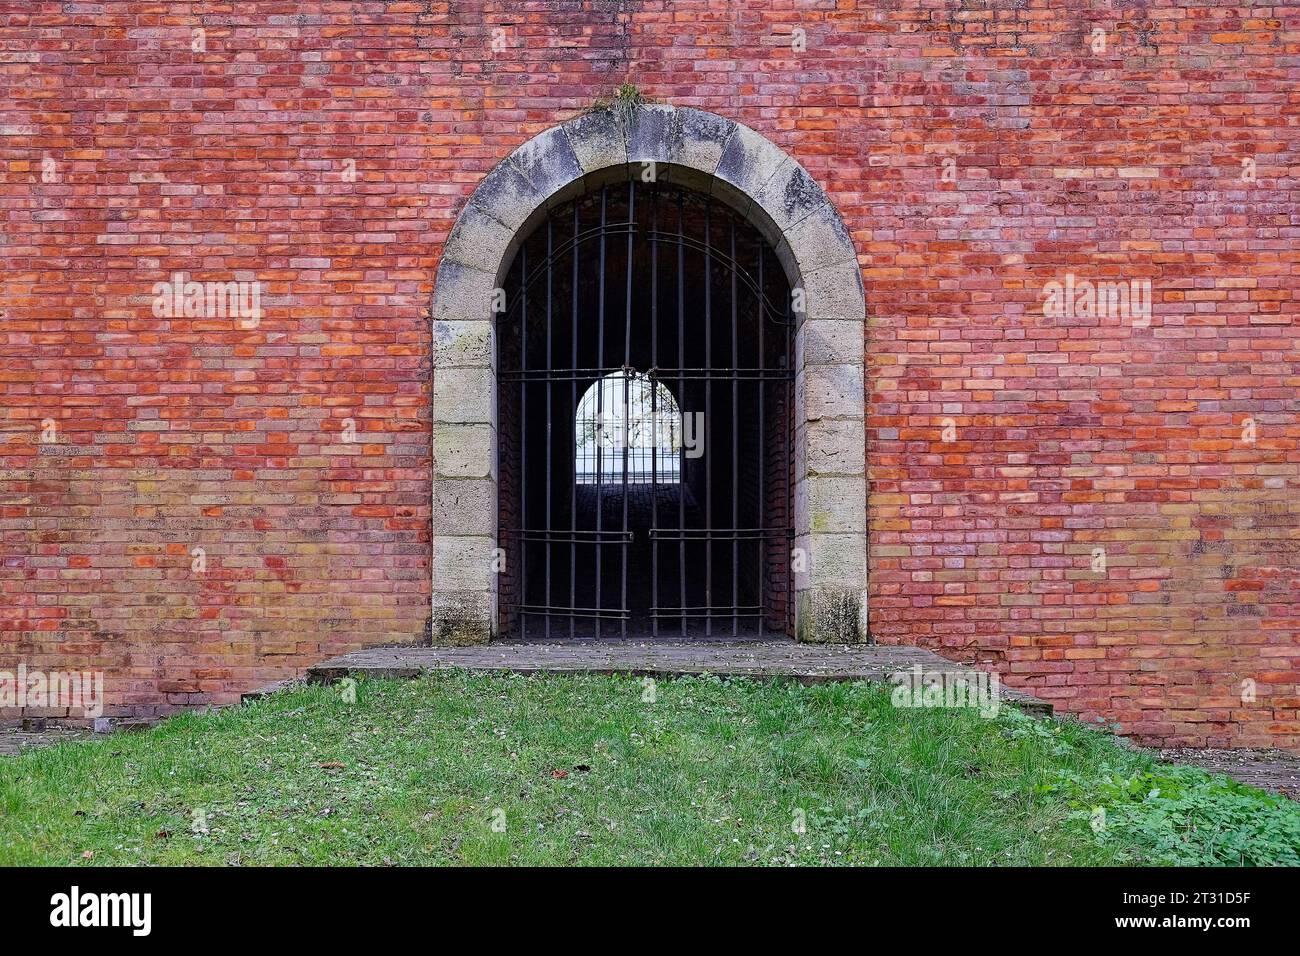 A passage closed by a lattice in an old brick fortress wall. Antique brickwork. Stock Photo